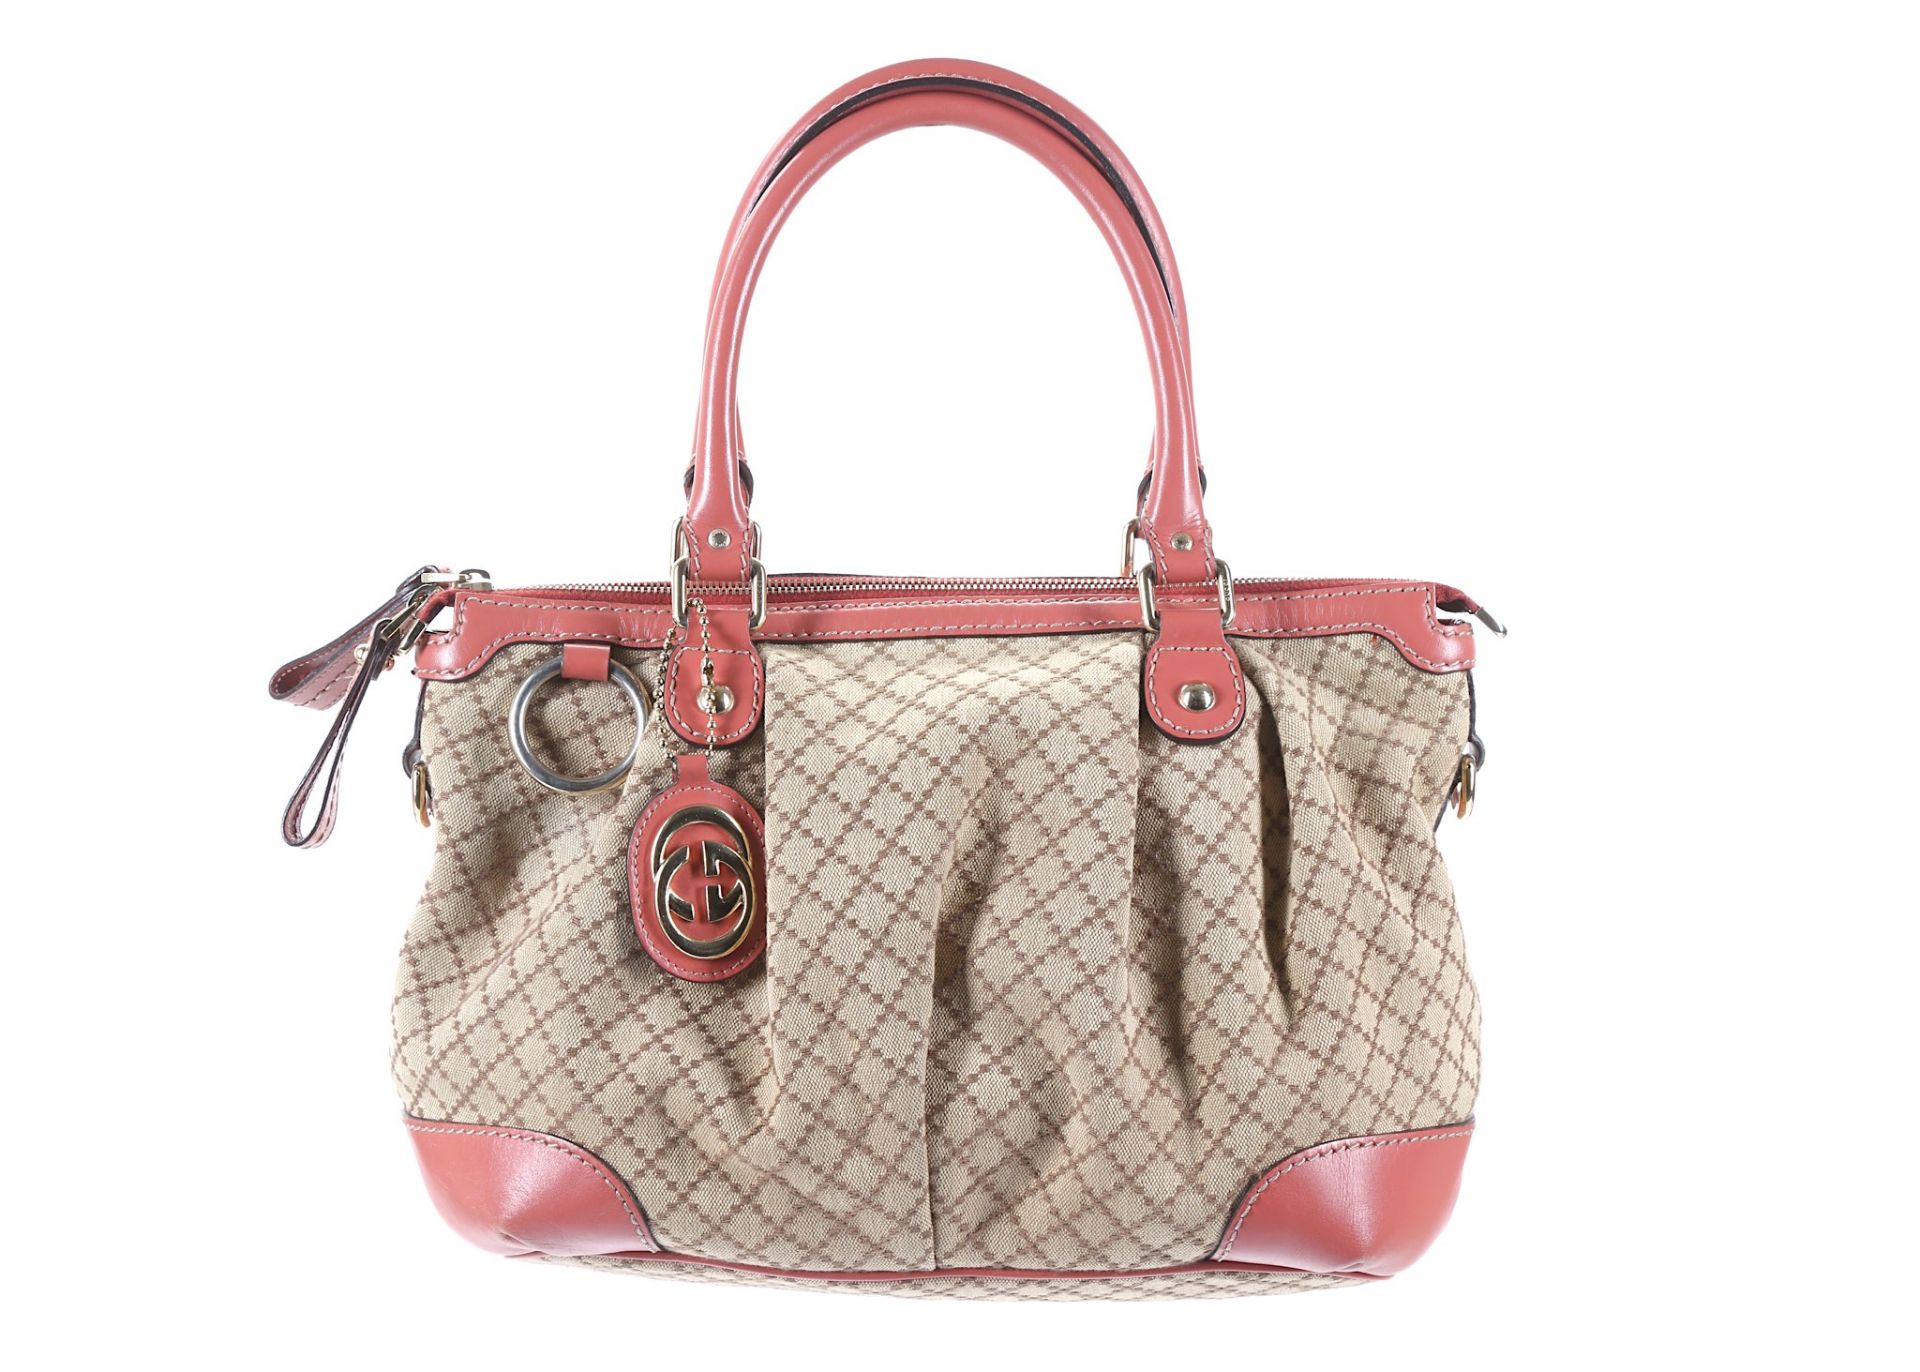 Gucci Pink Leather and Canvas Sukey Tote, diamond